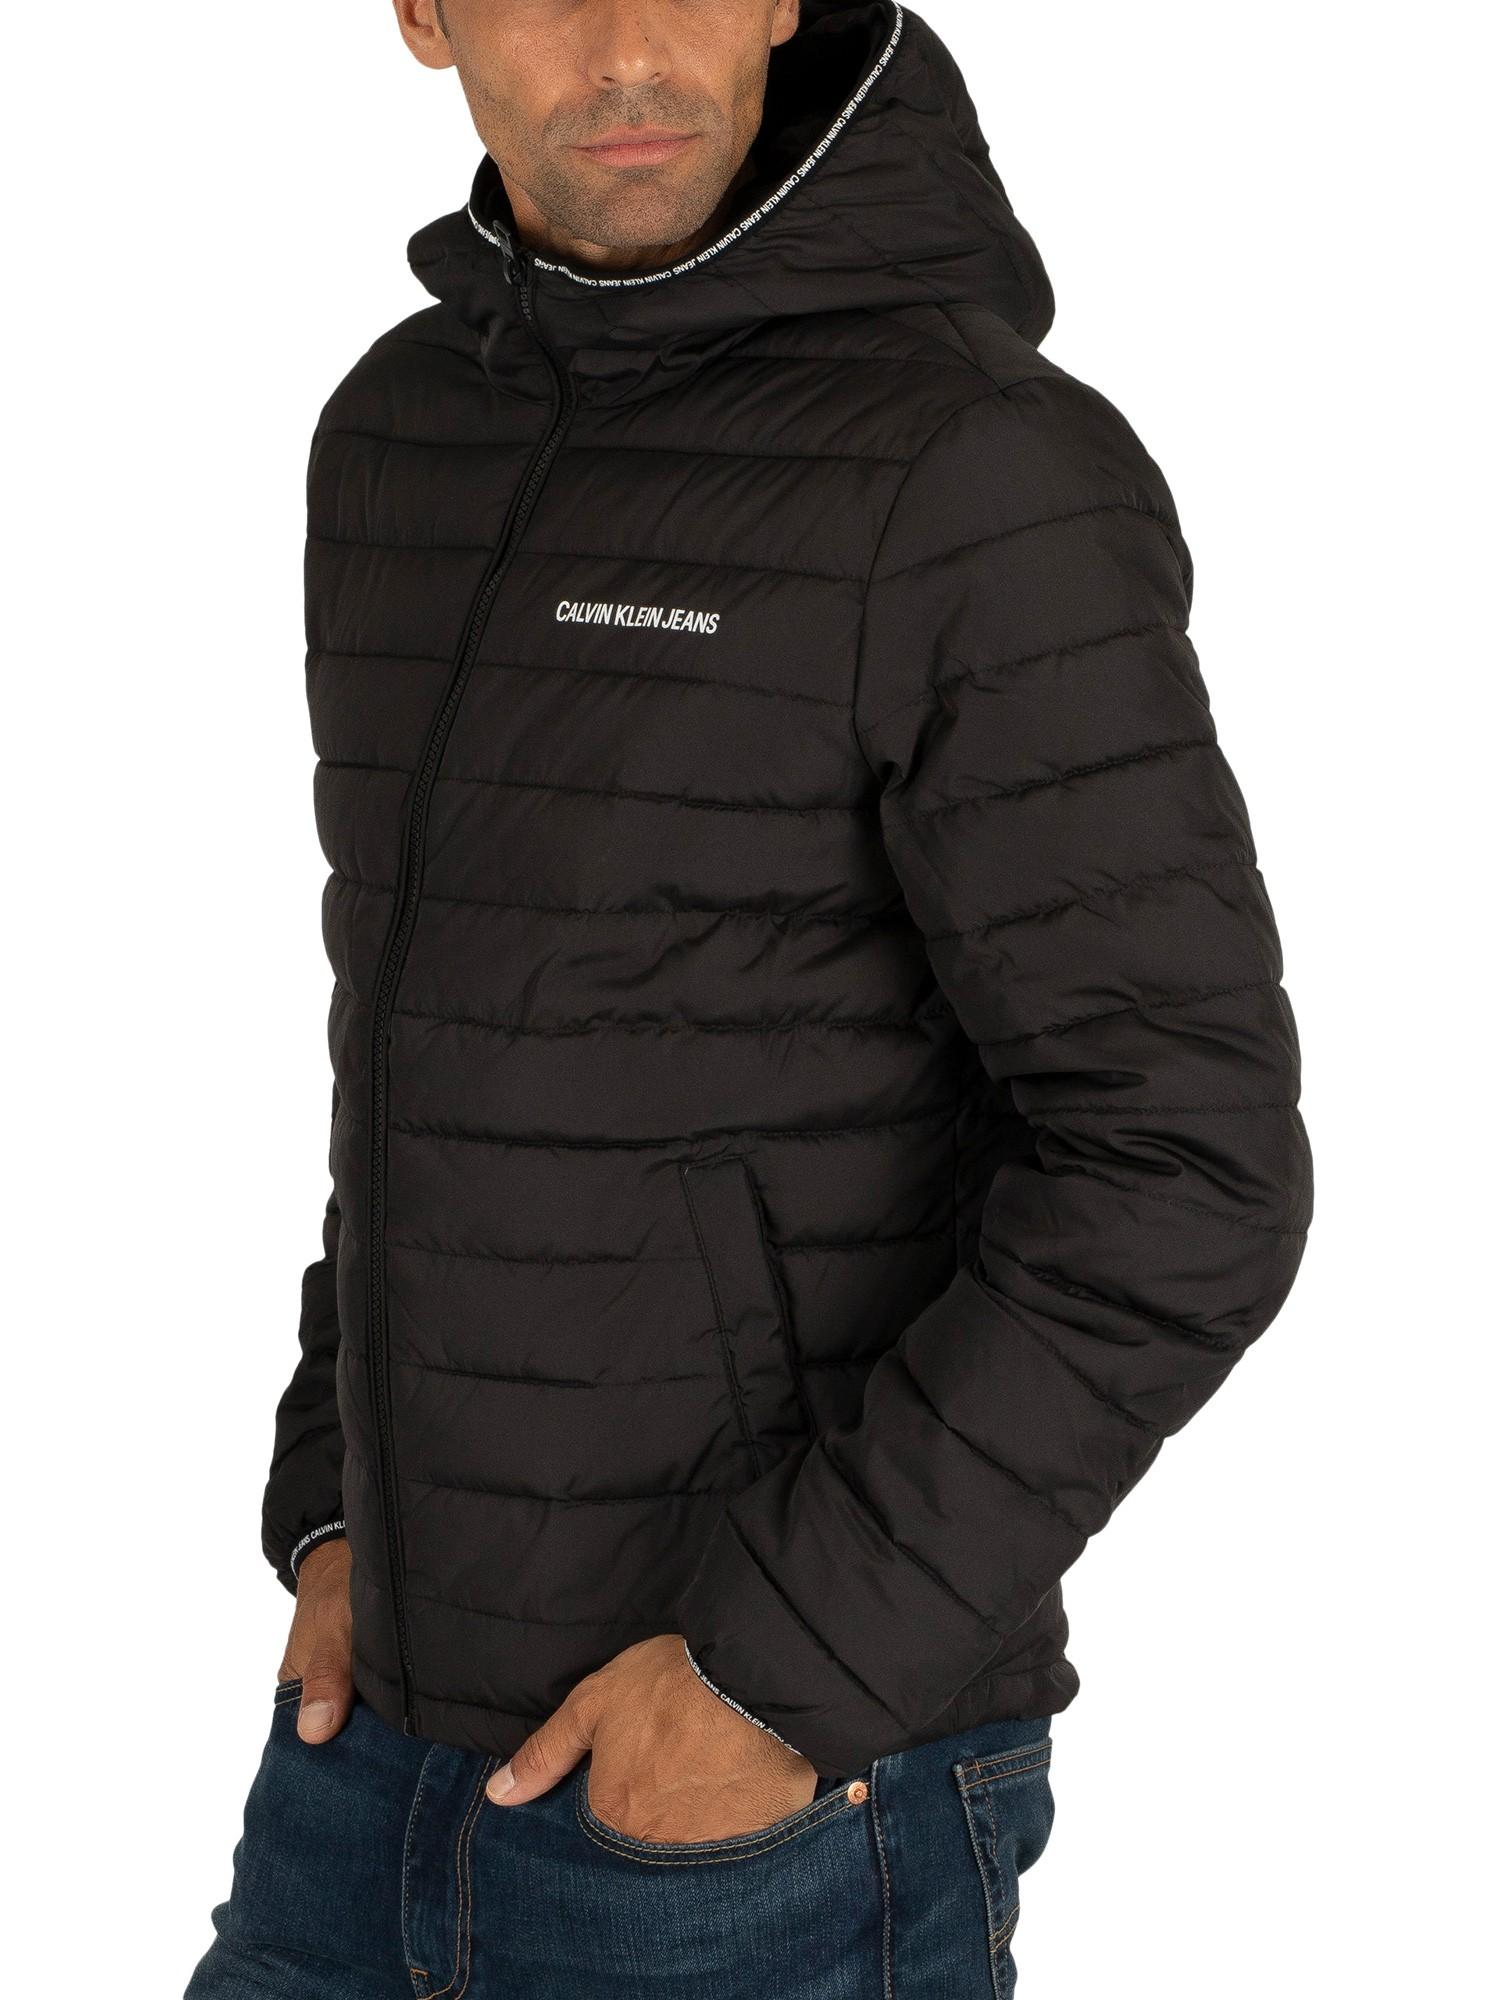 Calvin Klein Jeans Hooded Padded Jacket Hotsell, SAVE 32% - eagleflair.com